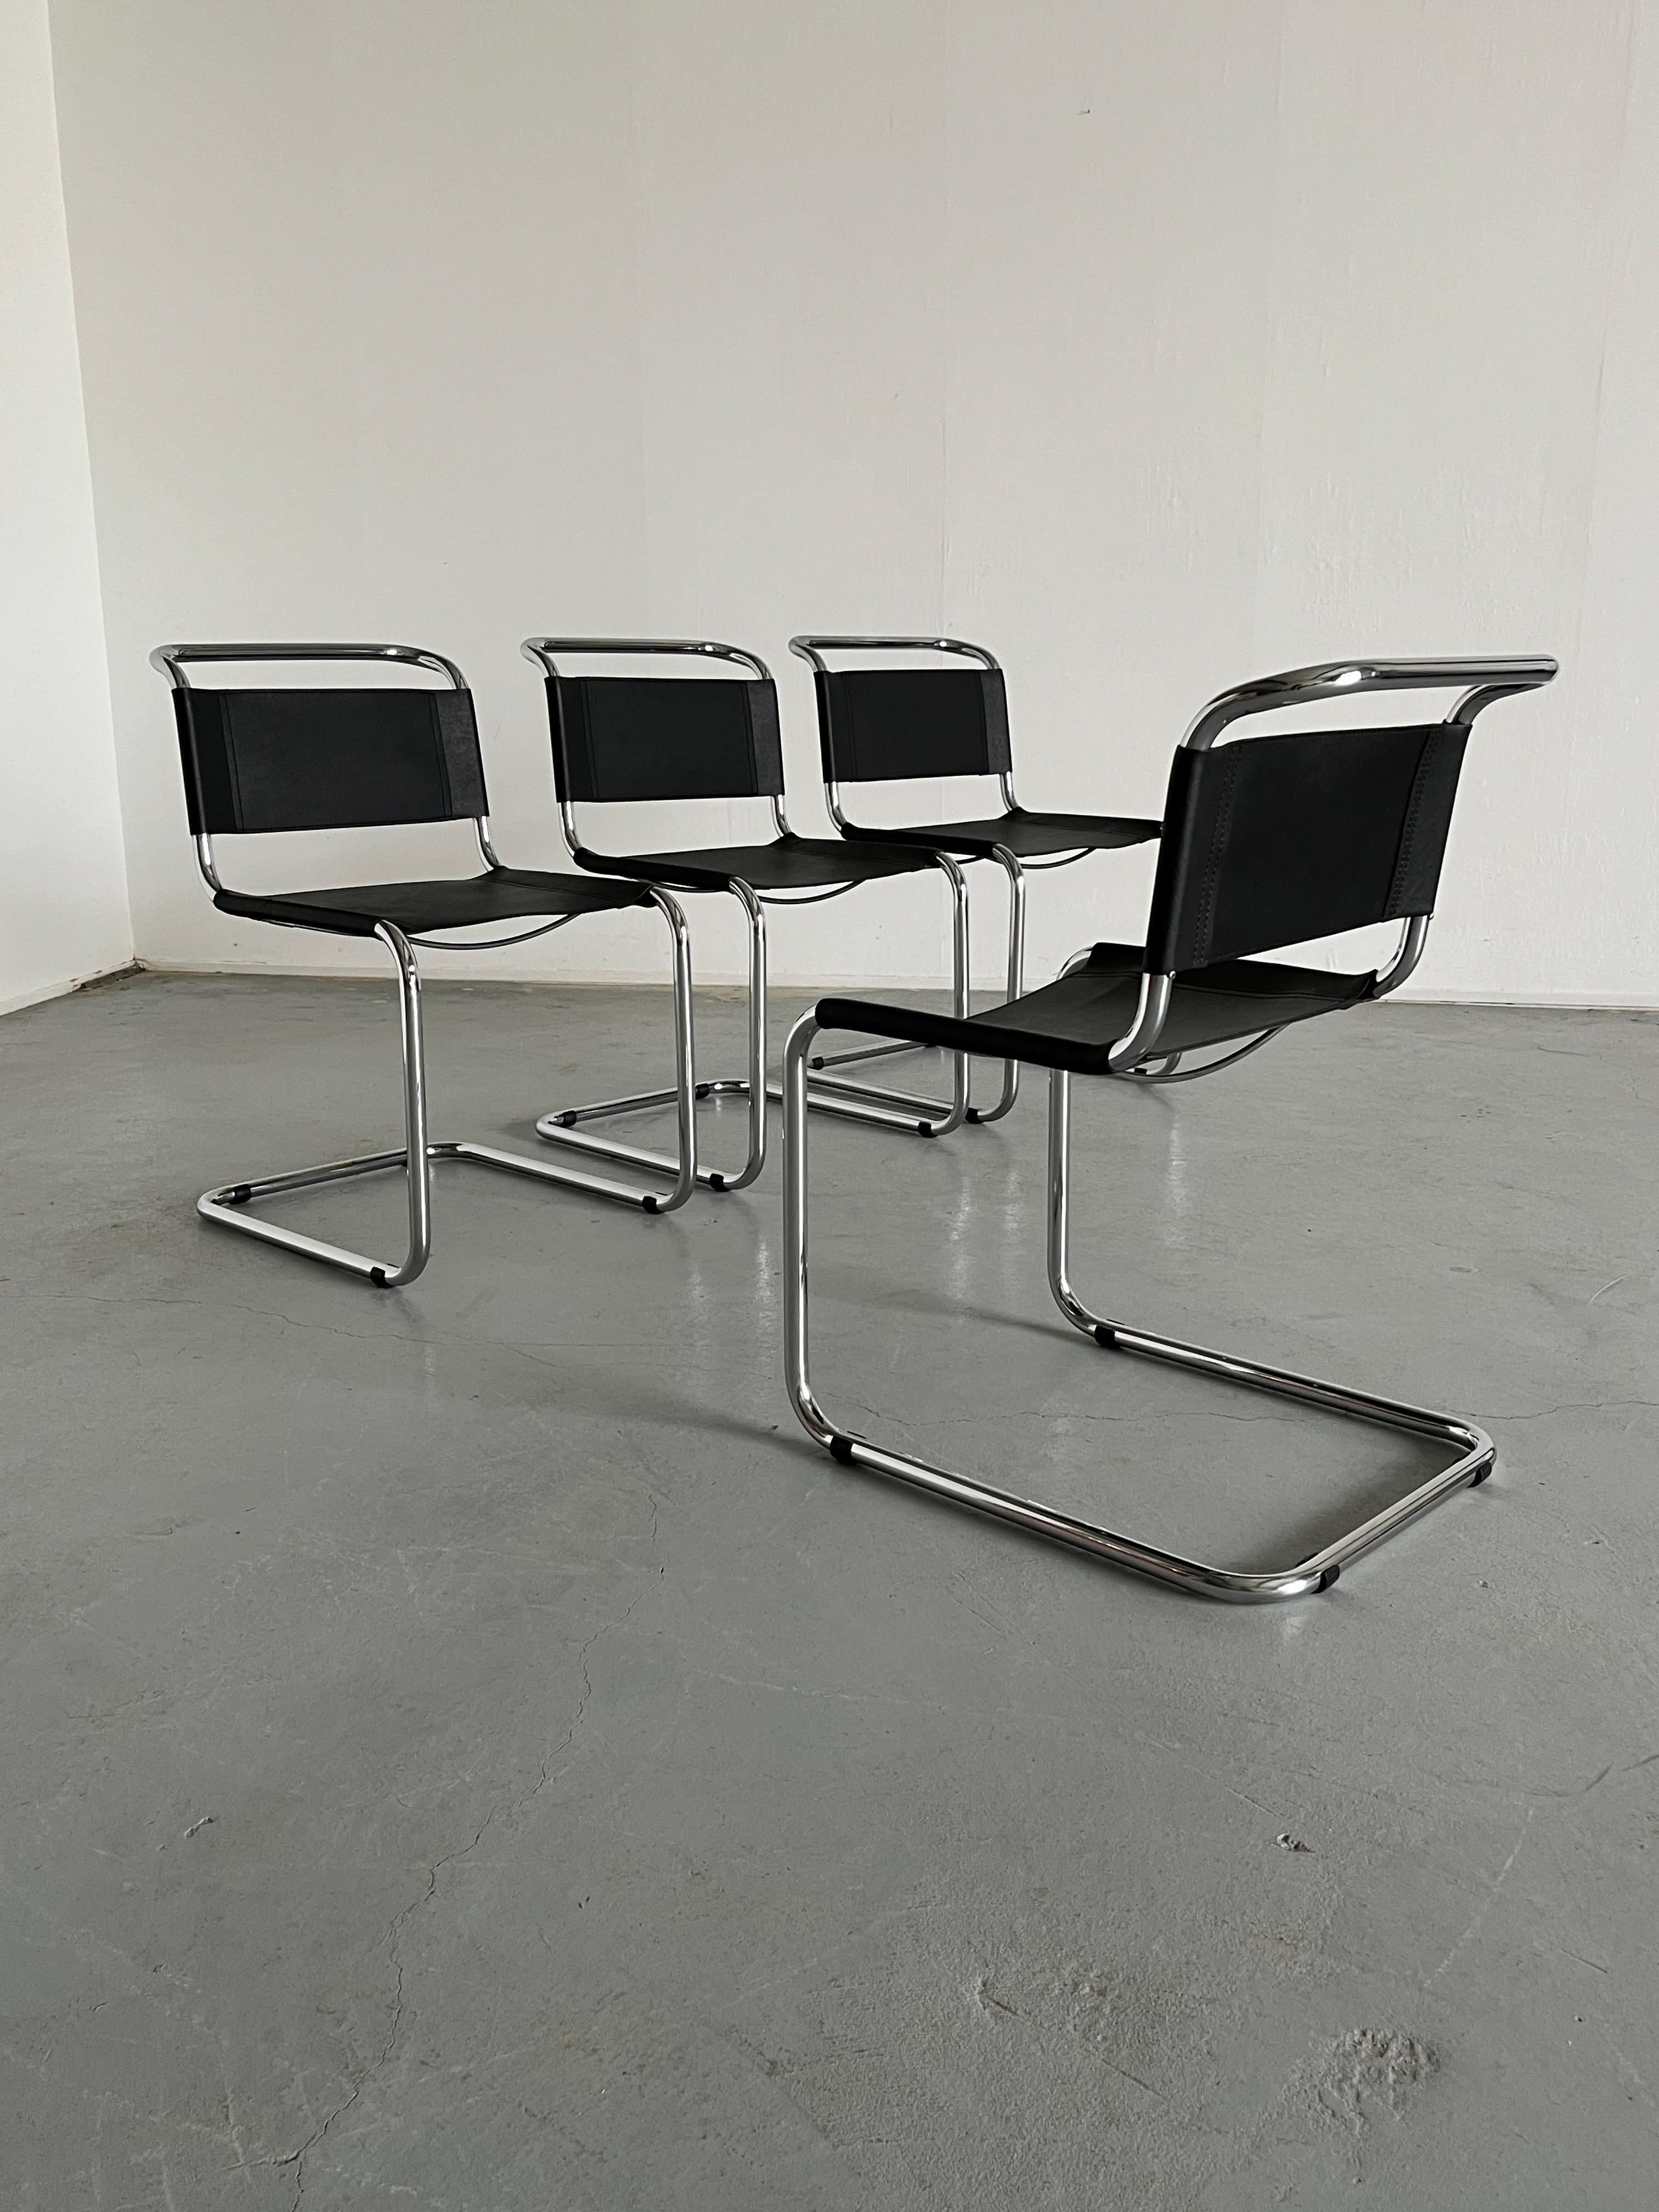 Mart Stam S33 Design Cantilever Tubular Steel and Faux Leather Chairs, 1970s For Sale 1